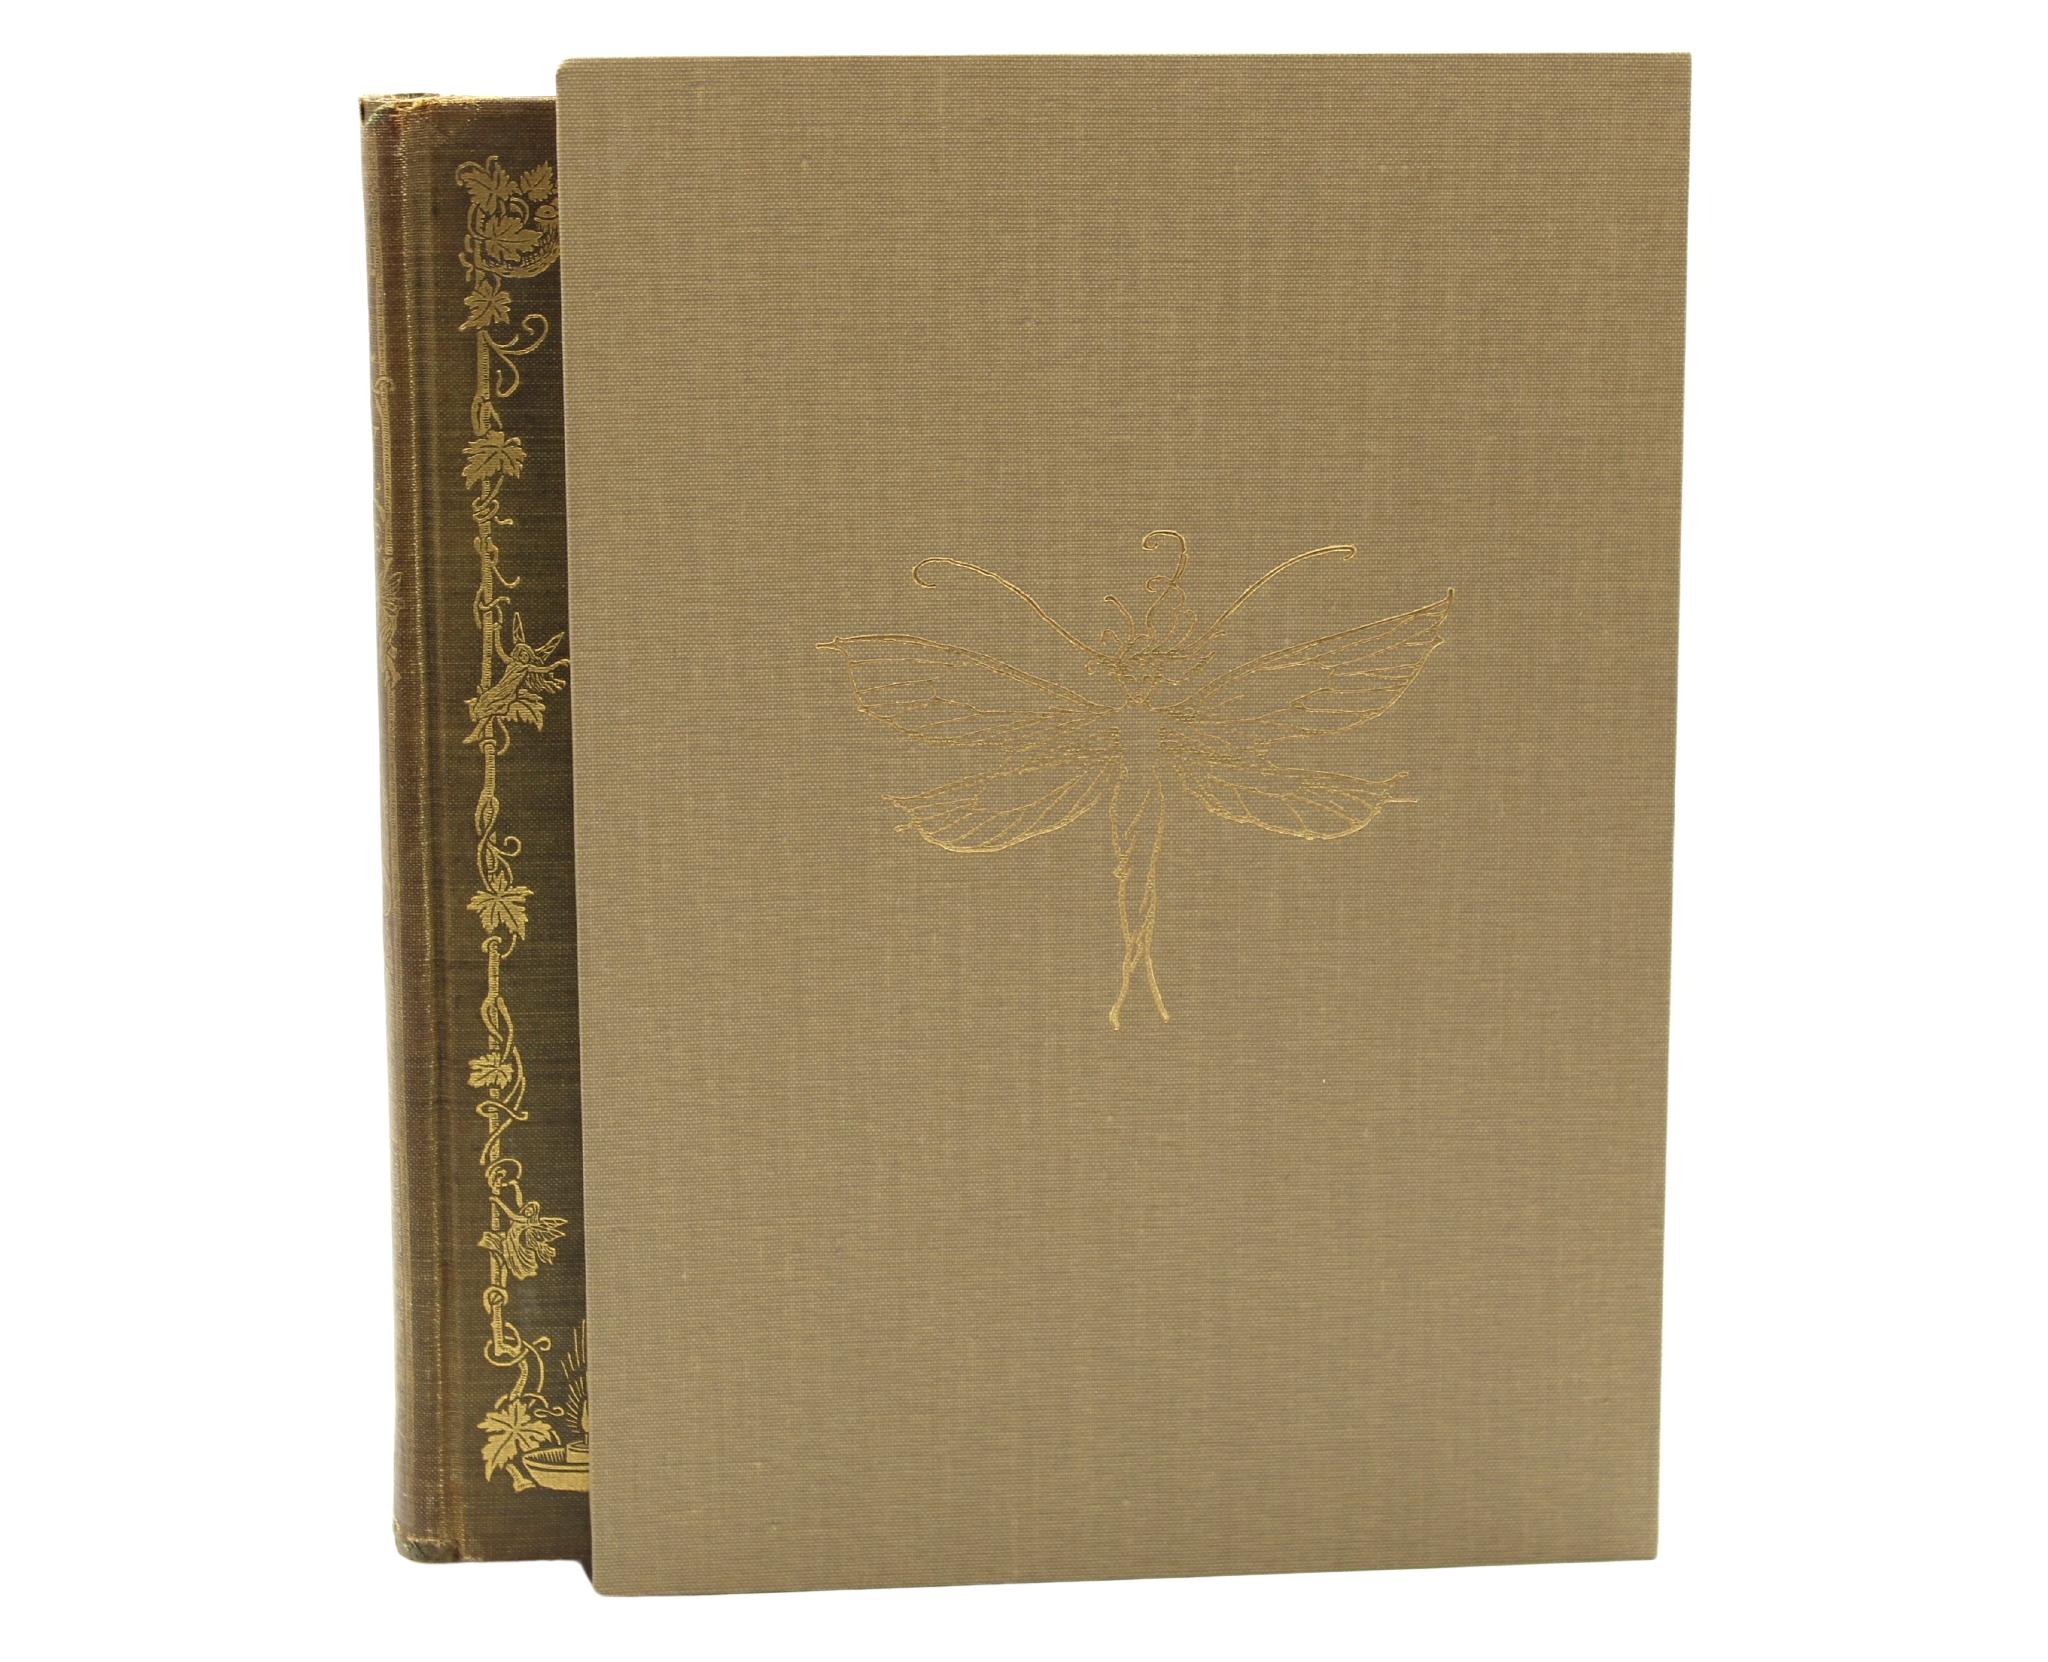 Peter and Wendy by James M. Barrie, First American Trade Edition, 1911 For Sale 6